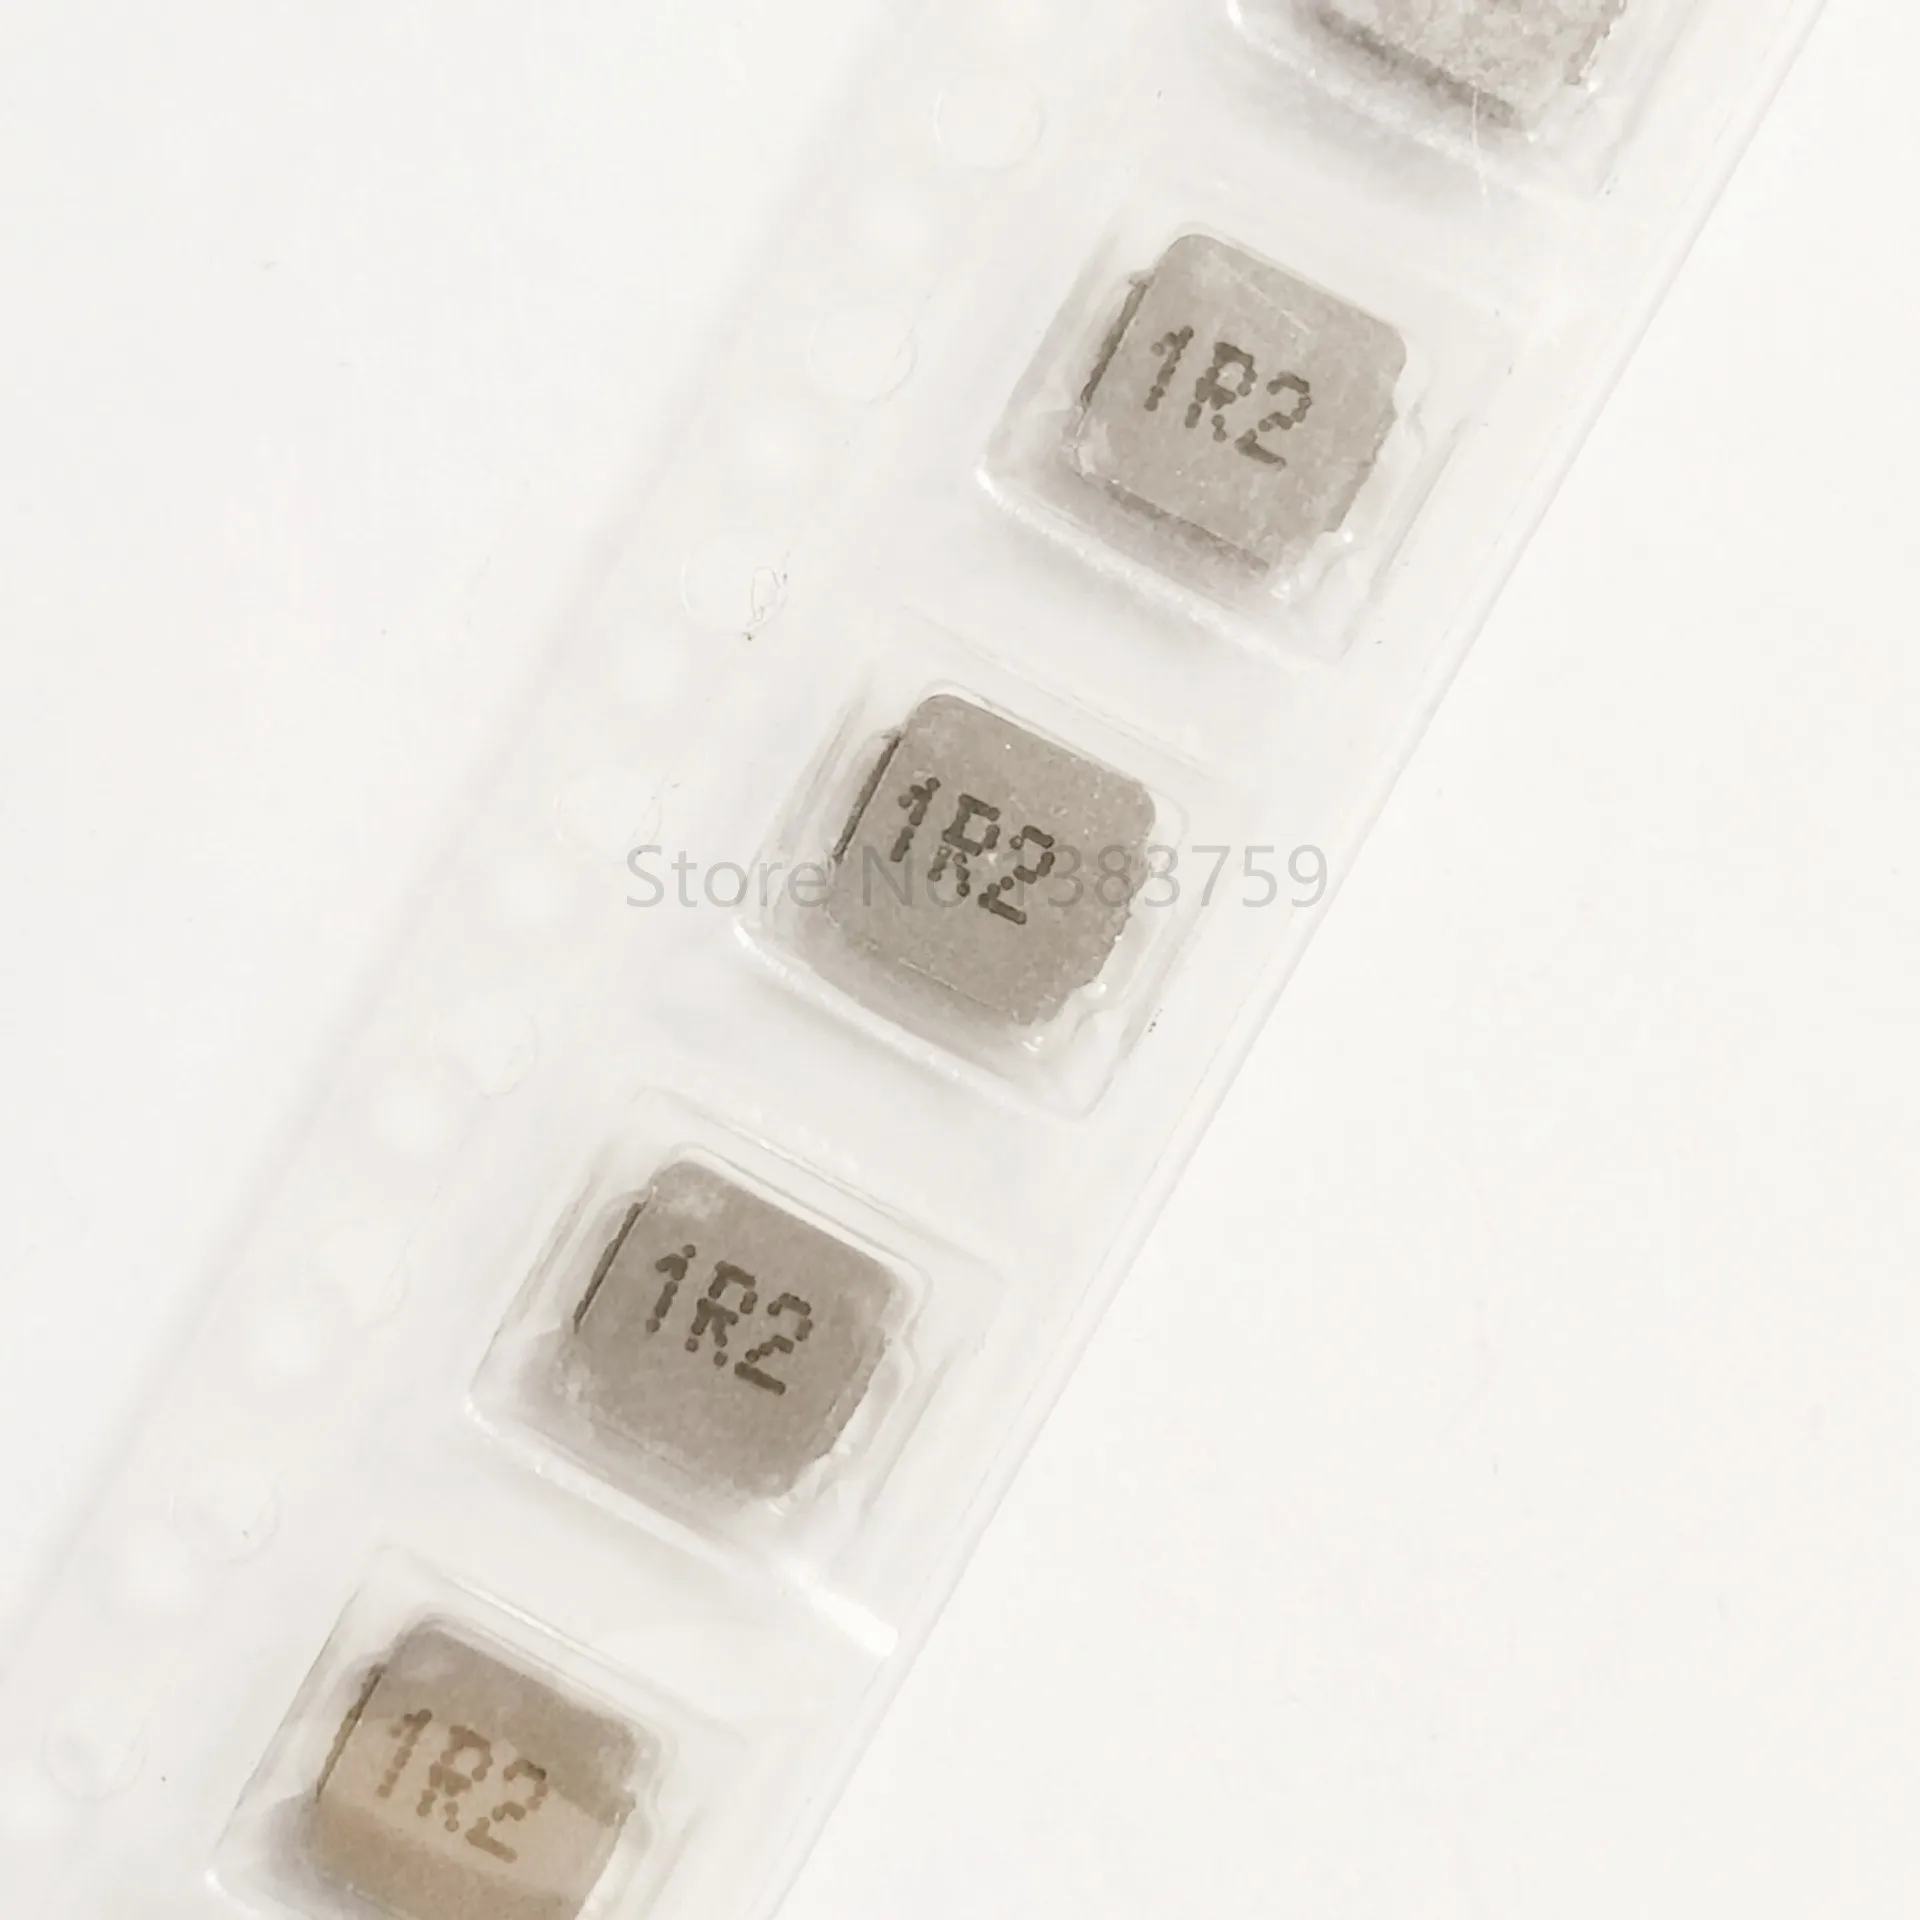 

20pcs 0530 0.47UH 0.68UH 1UH 1.2UH 1.5UH 2.2UH 3.3UH 4.7UH 6.8UH 10UH 15UH SMD integrated inductor 5*5*3MM high current